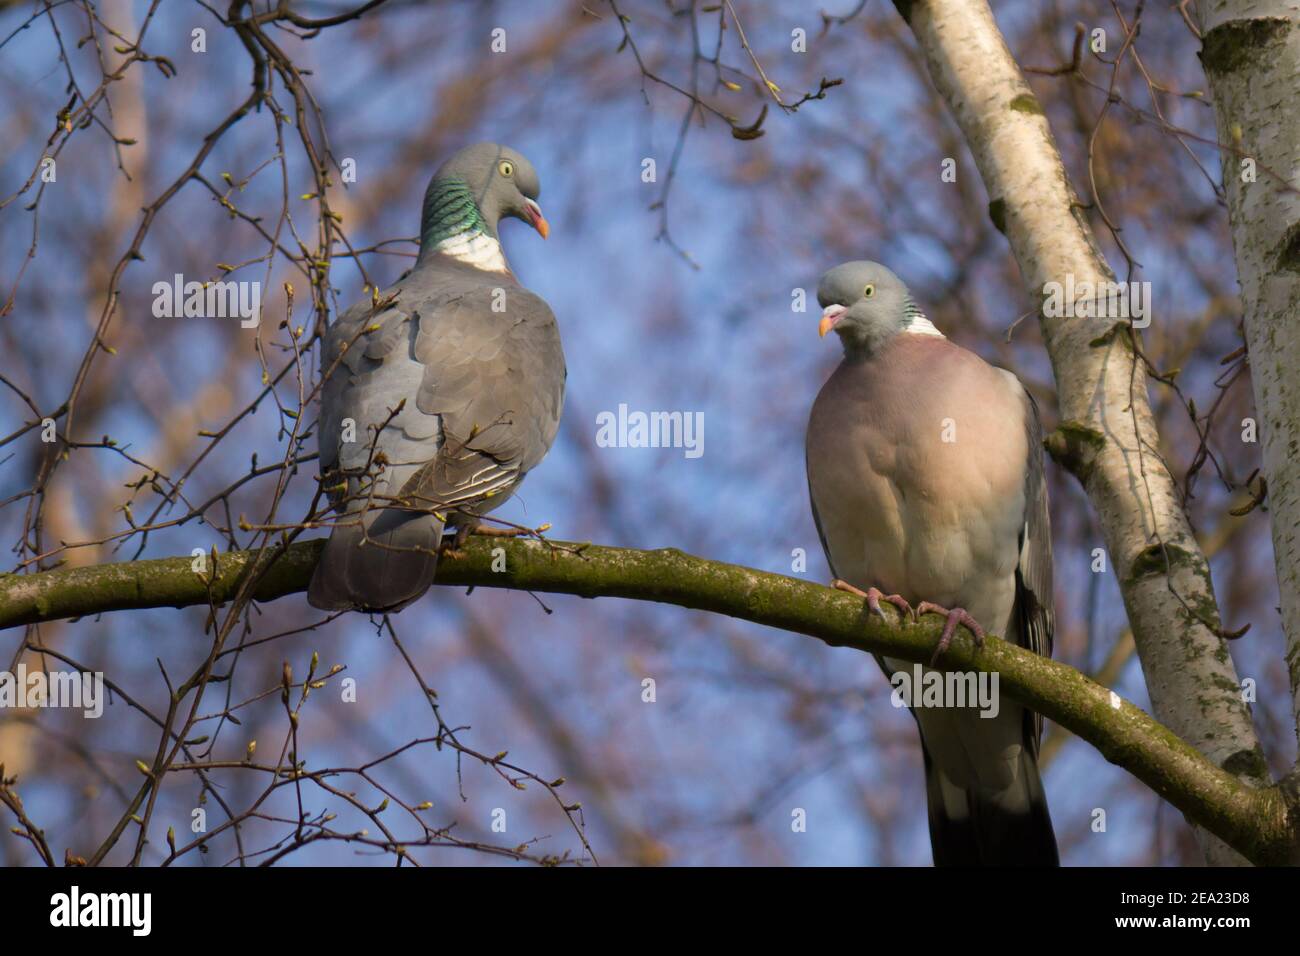 Couple of wood pigeons (columba palumbus) sitting on a birch tree branch during early spring Stock Photo